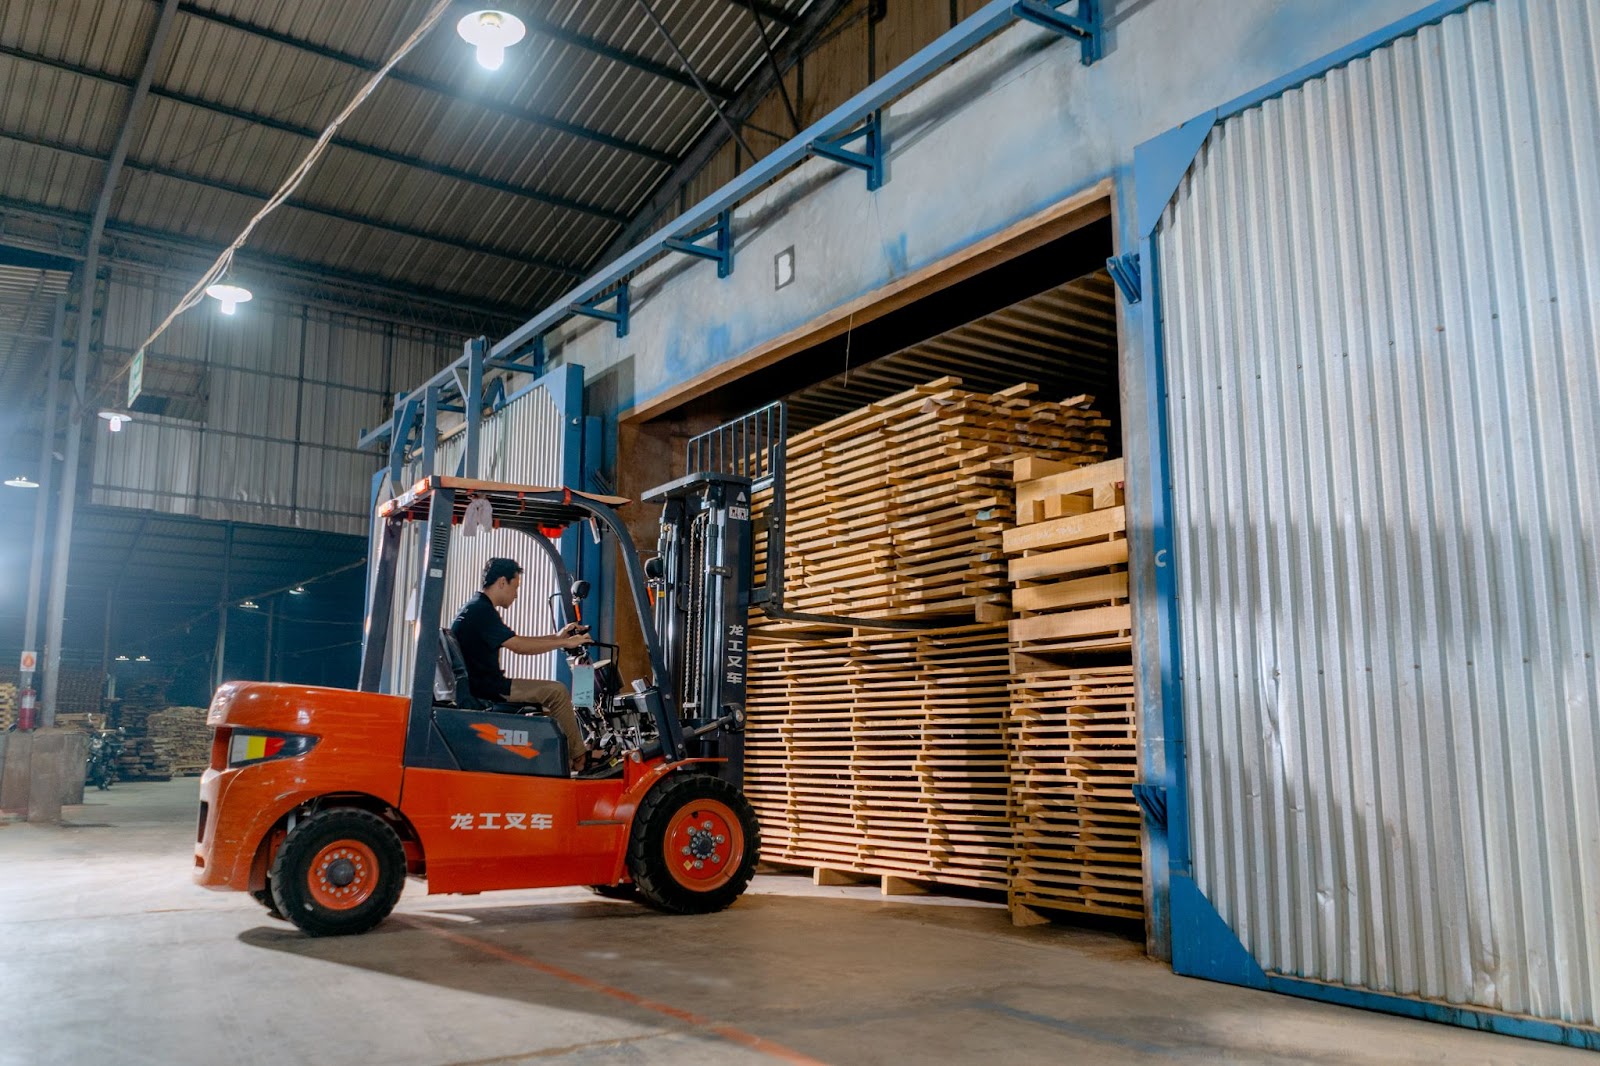 A forklift operator lifting tines to carry wooden pallets